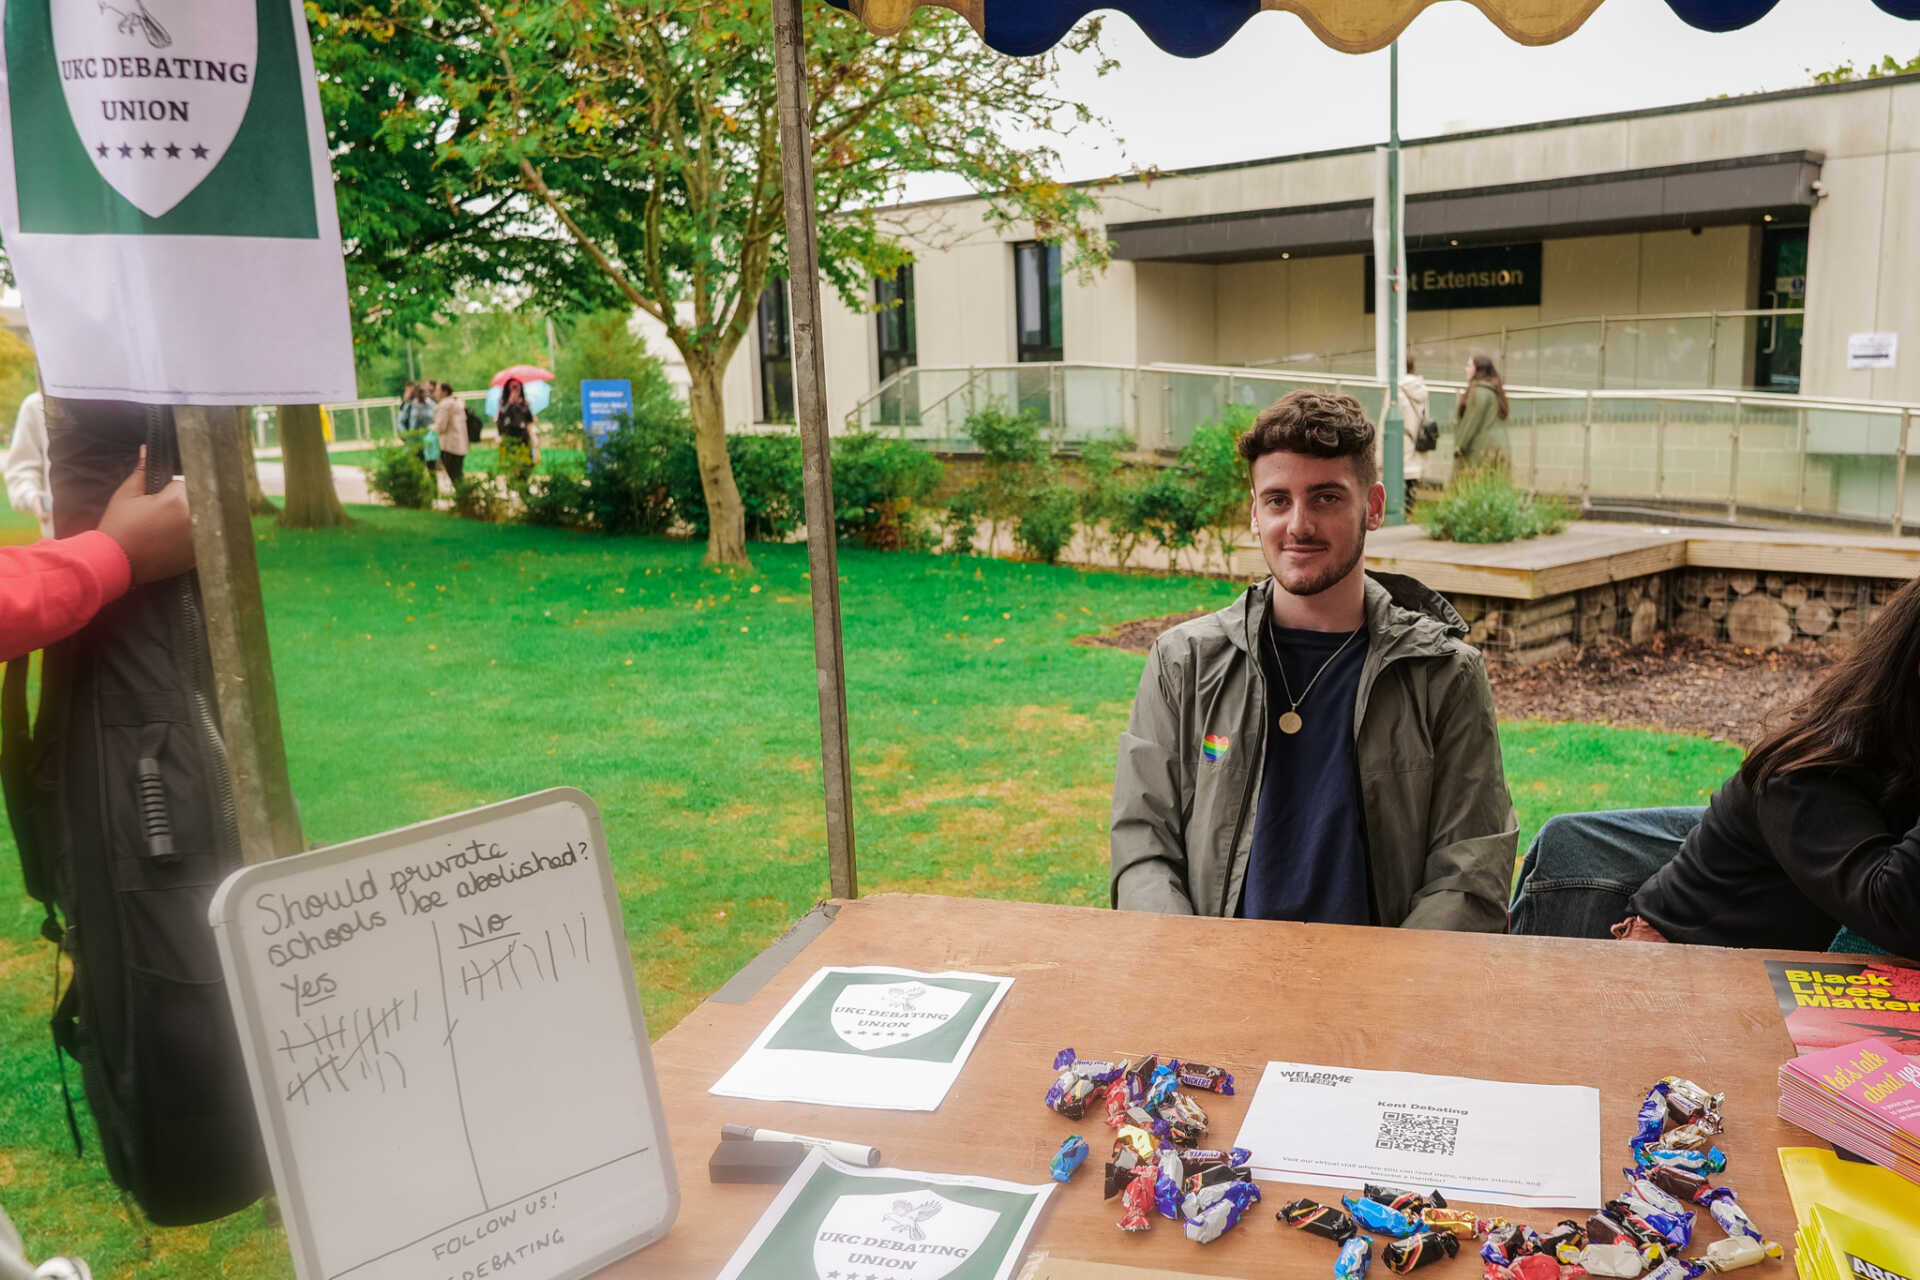 Student Cahrlie Cushway on the Debating Society Stand at Welcome week.